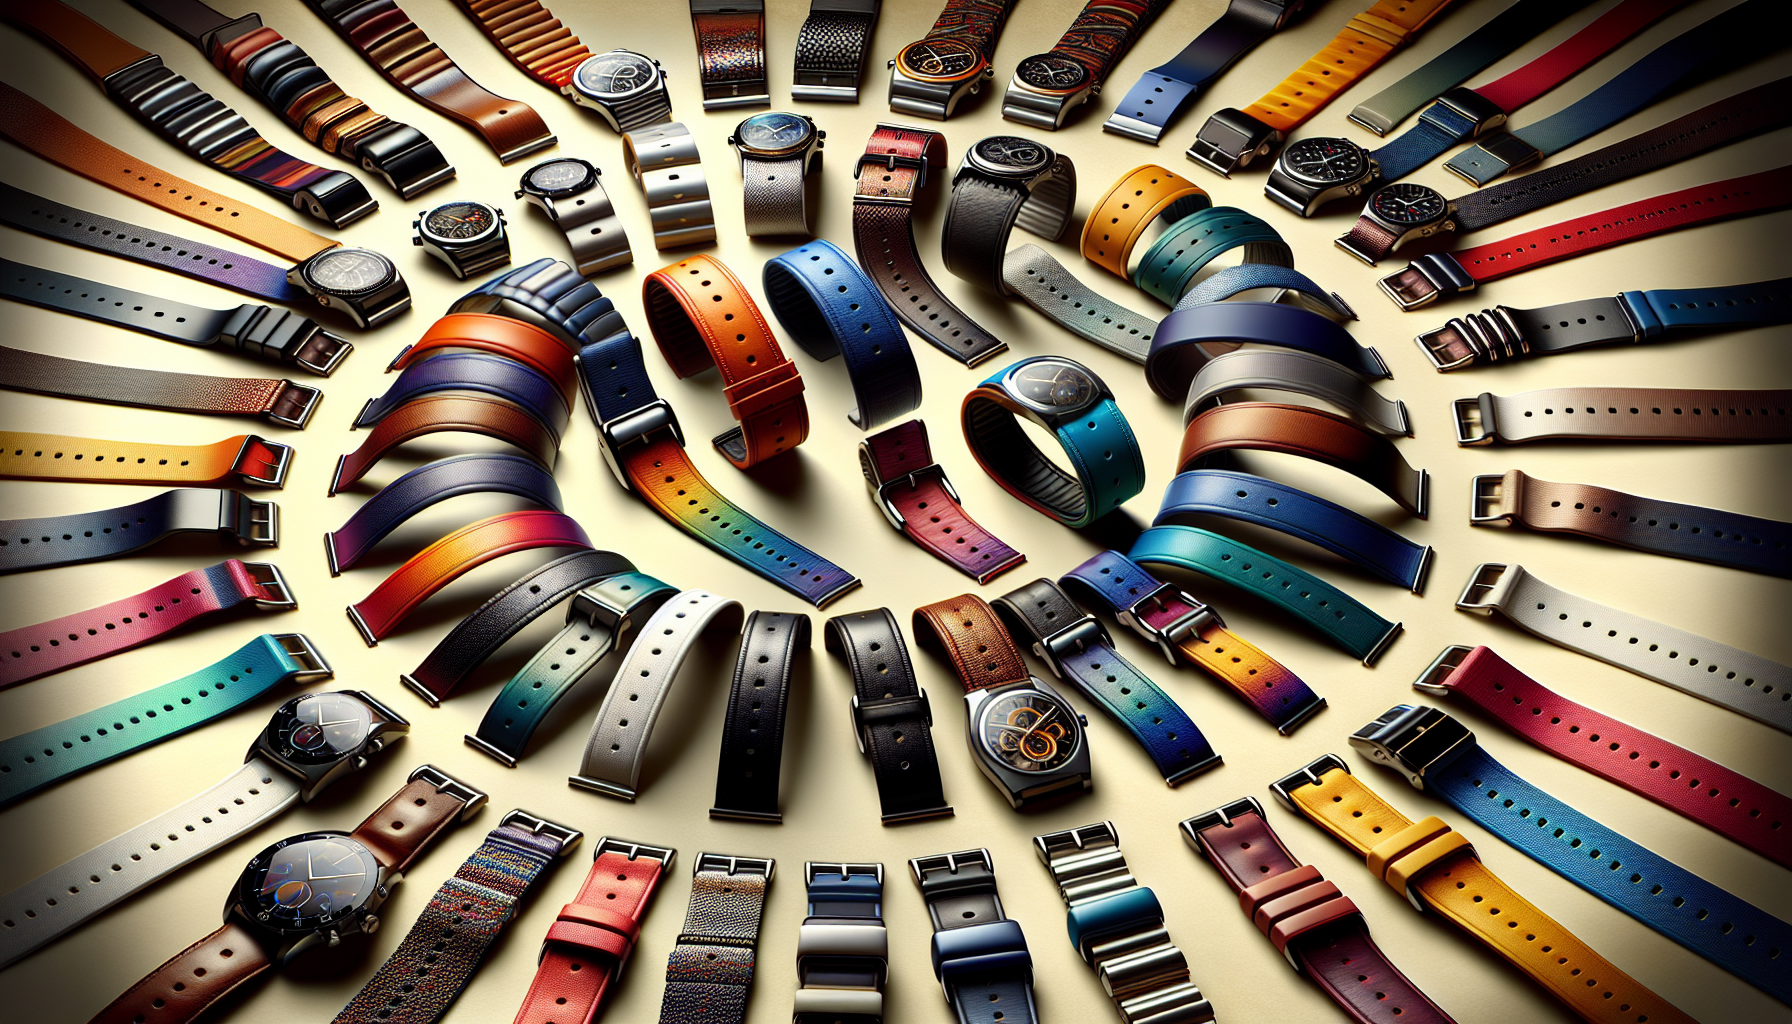 Variety of adjustable watch bands